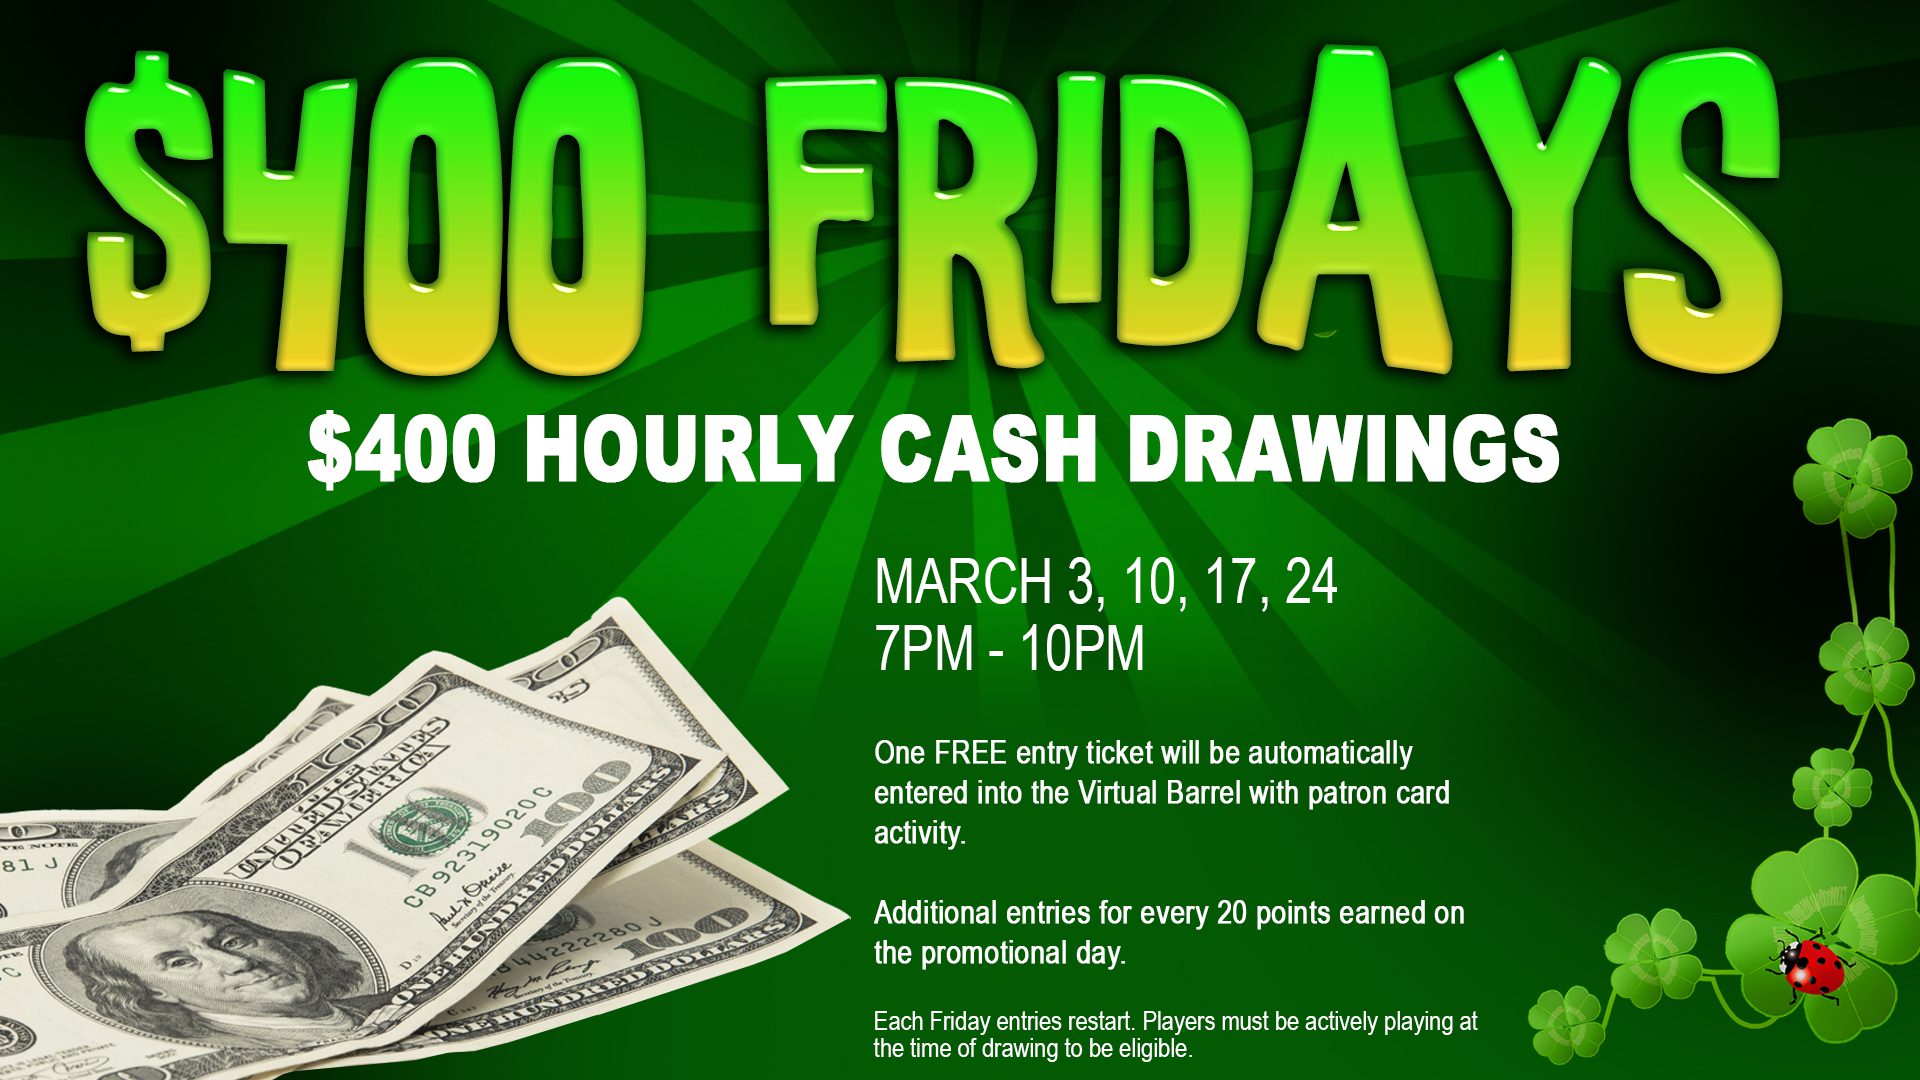 A poster advertising cash drawing for the 1 0 0 th friday.